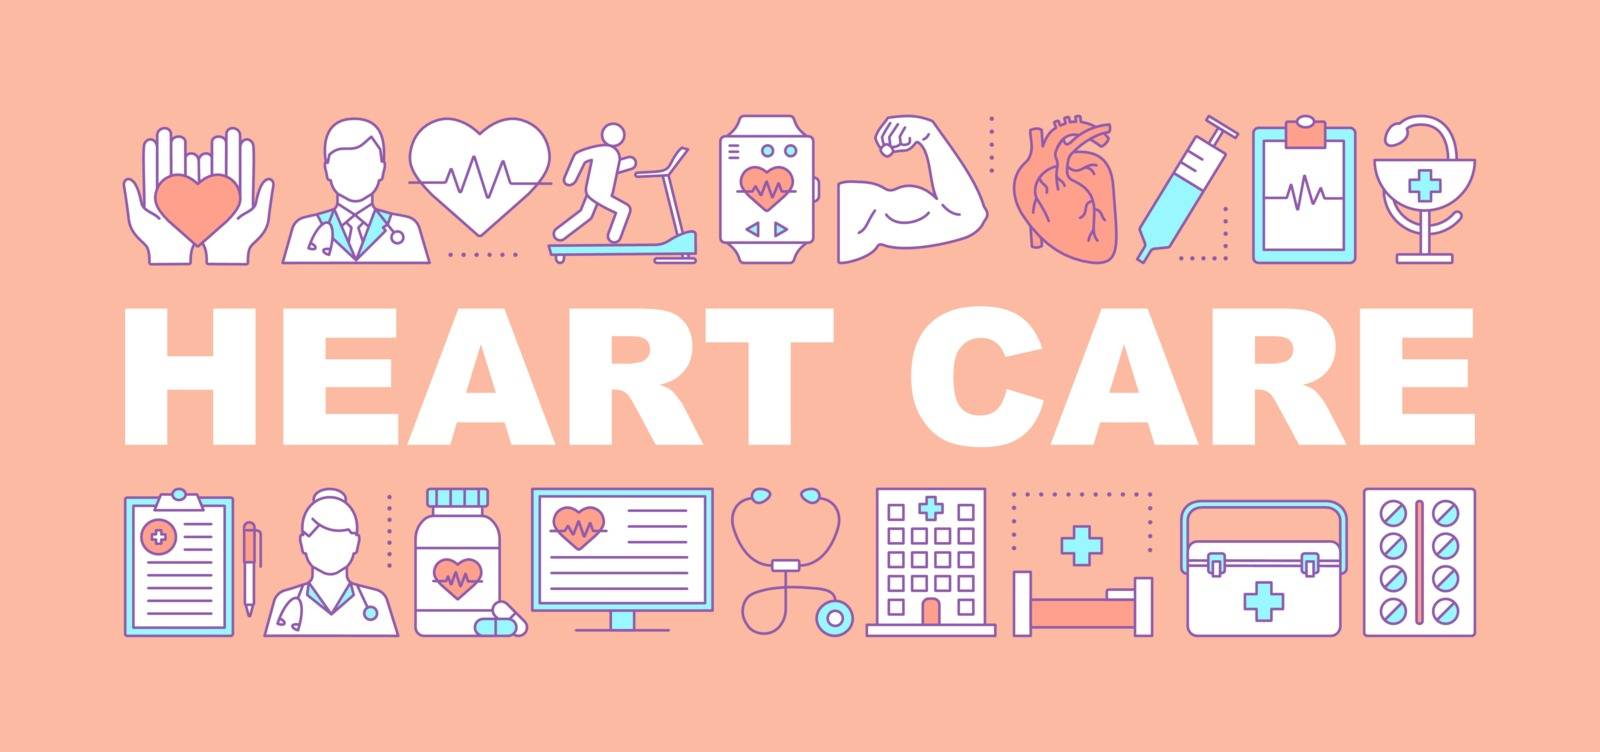 Heart care word concepts banner. Cardiology. Cardiovascular disease treatment and diagnosis. Isolated lettering typography idea with linear icons. Vector outline illustration